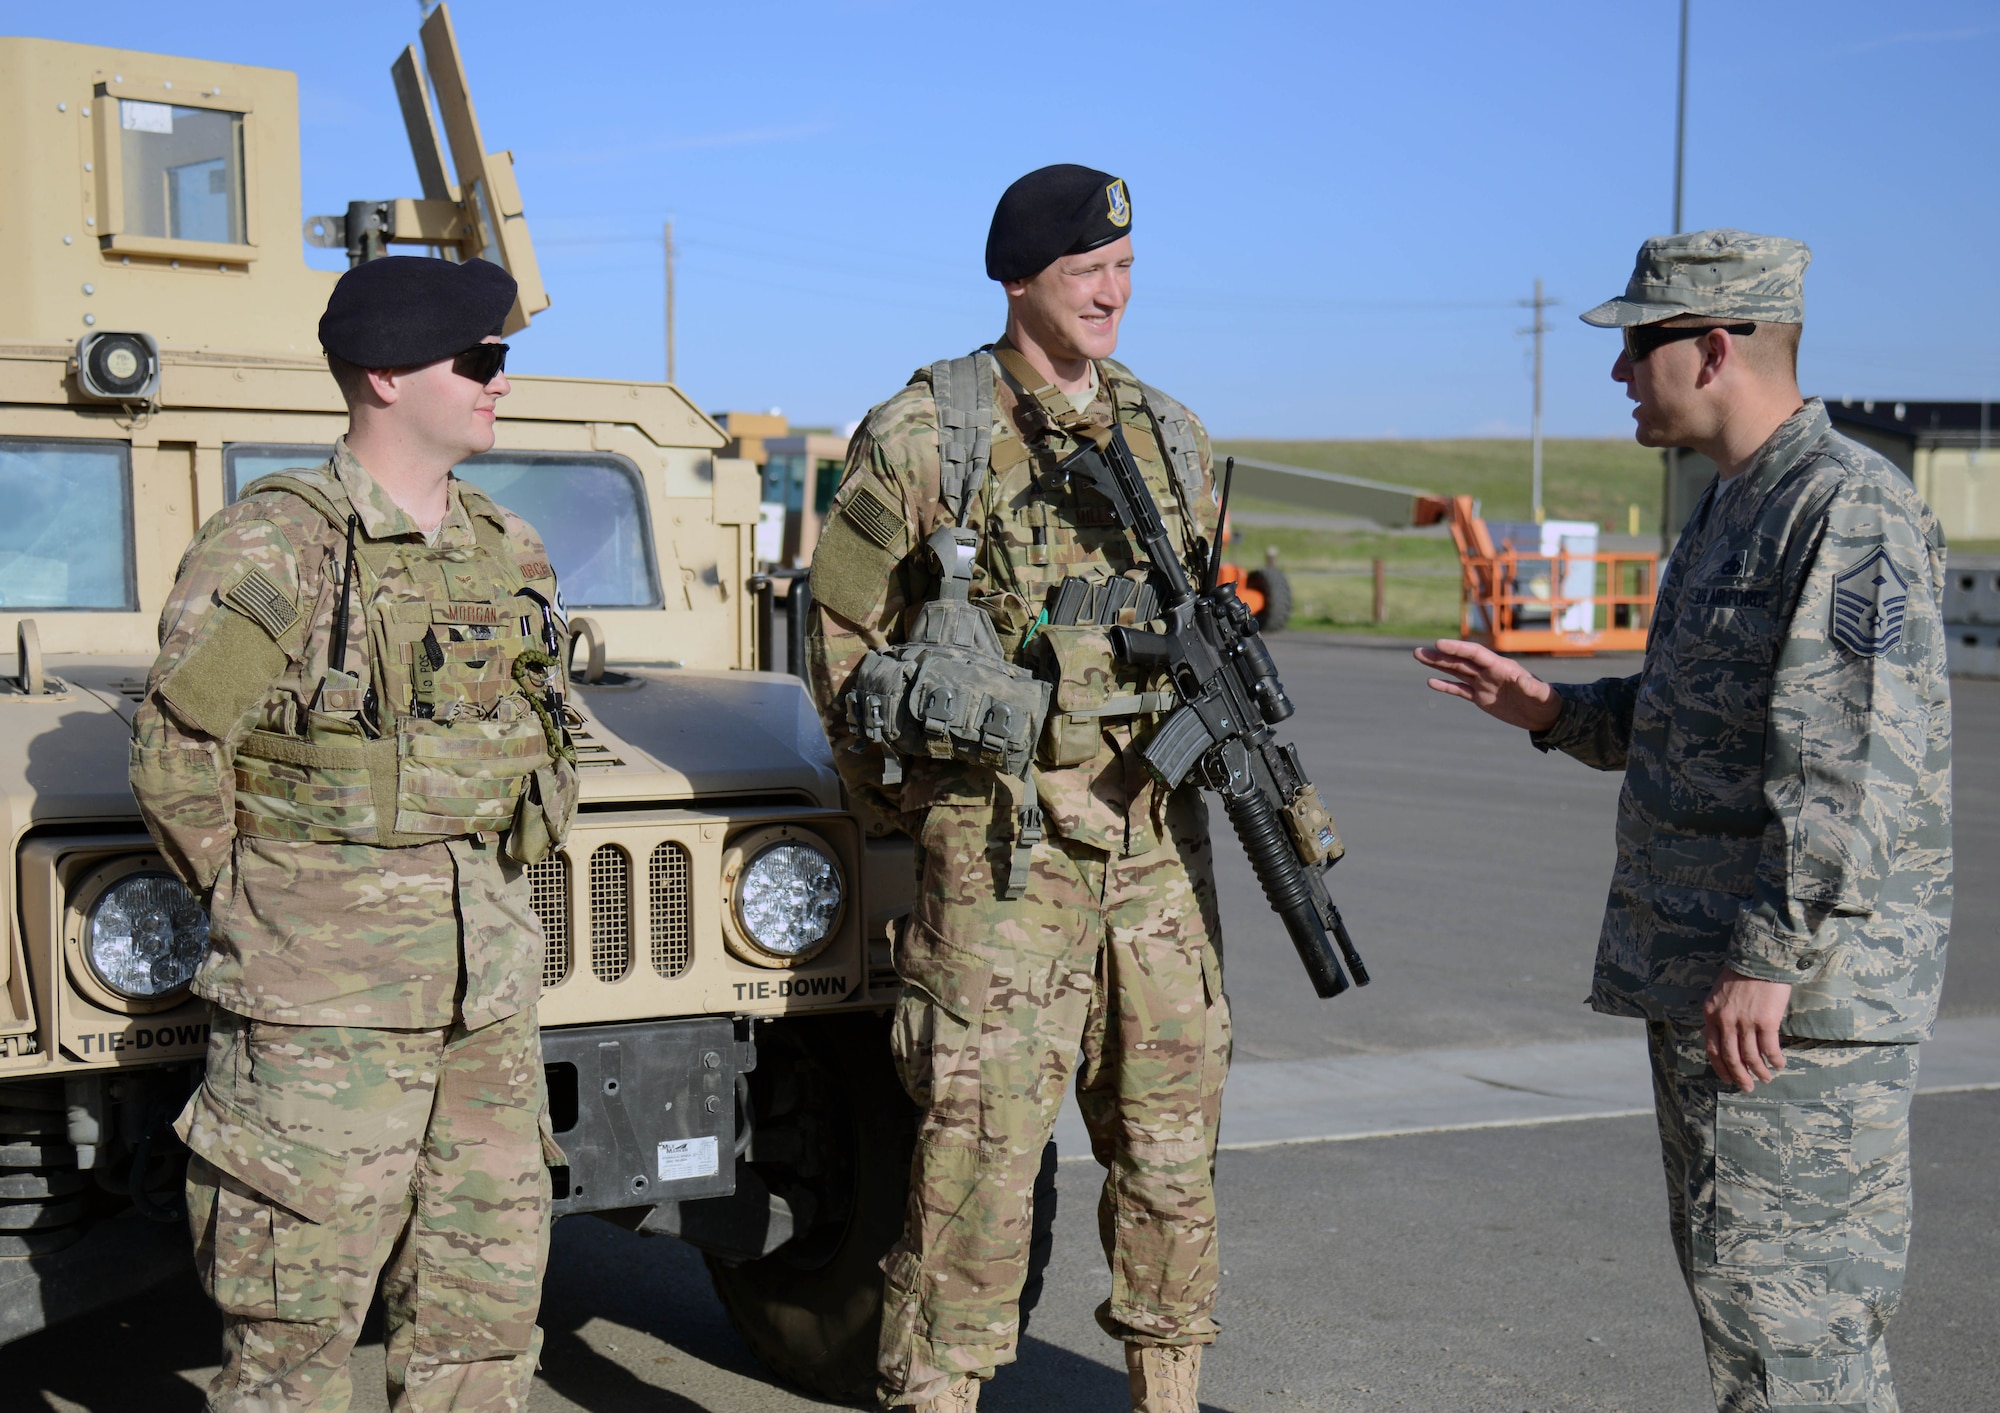 Master Sgt. Jason Whitehead, right, the 341st Security Forces Squadron first sergeant, speaks with Airmen 1st Class Richard Morgan, left, and Ricky Miller during a post visit May 5, 2015, at Malmstrom Air Force Base, Mont. Whitehead periodically checks in with Airmen to see how their personal lives are going in order to keep a finger on the pulse of the squadron. (U.S. Air Force photo/Airman 1st Class Dillon Johnston)